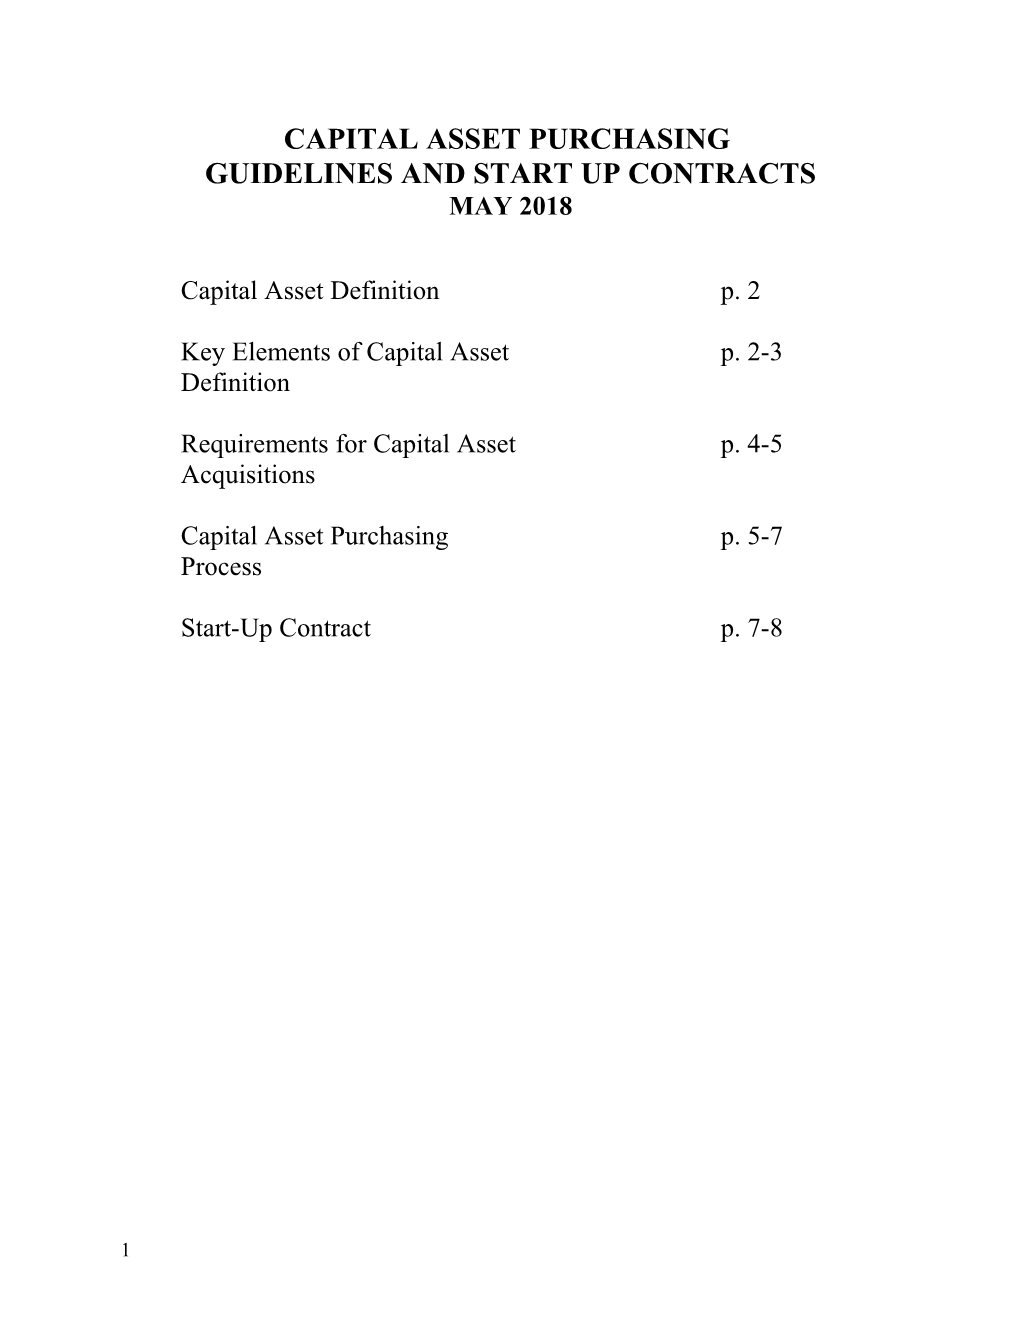 Guidelines and Start up Contracts